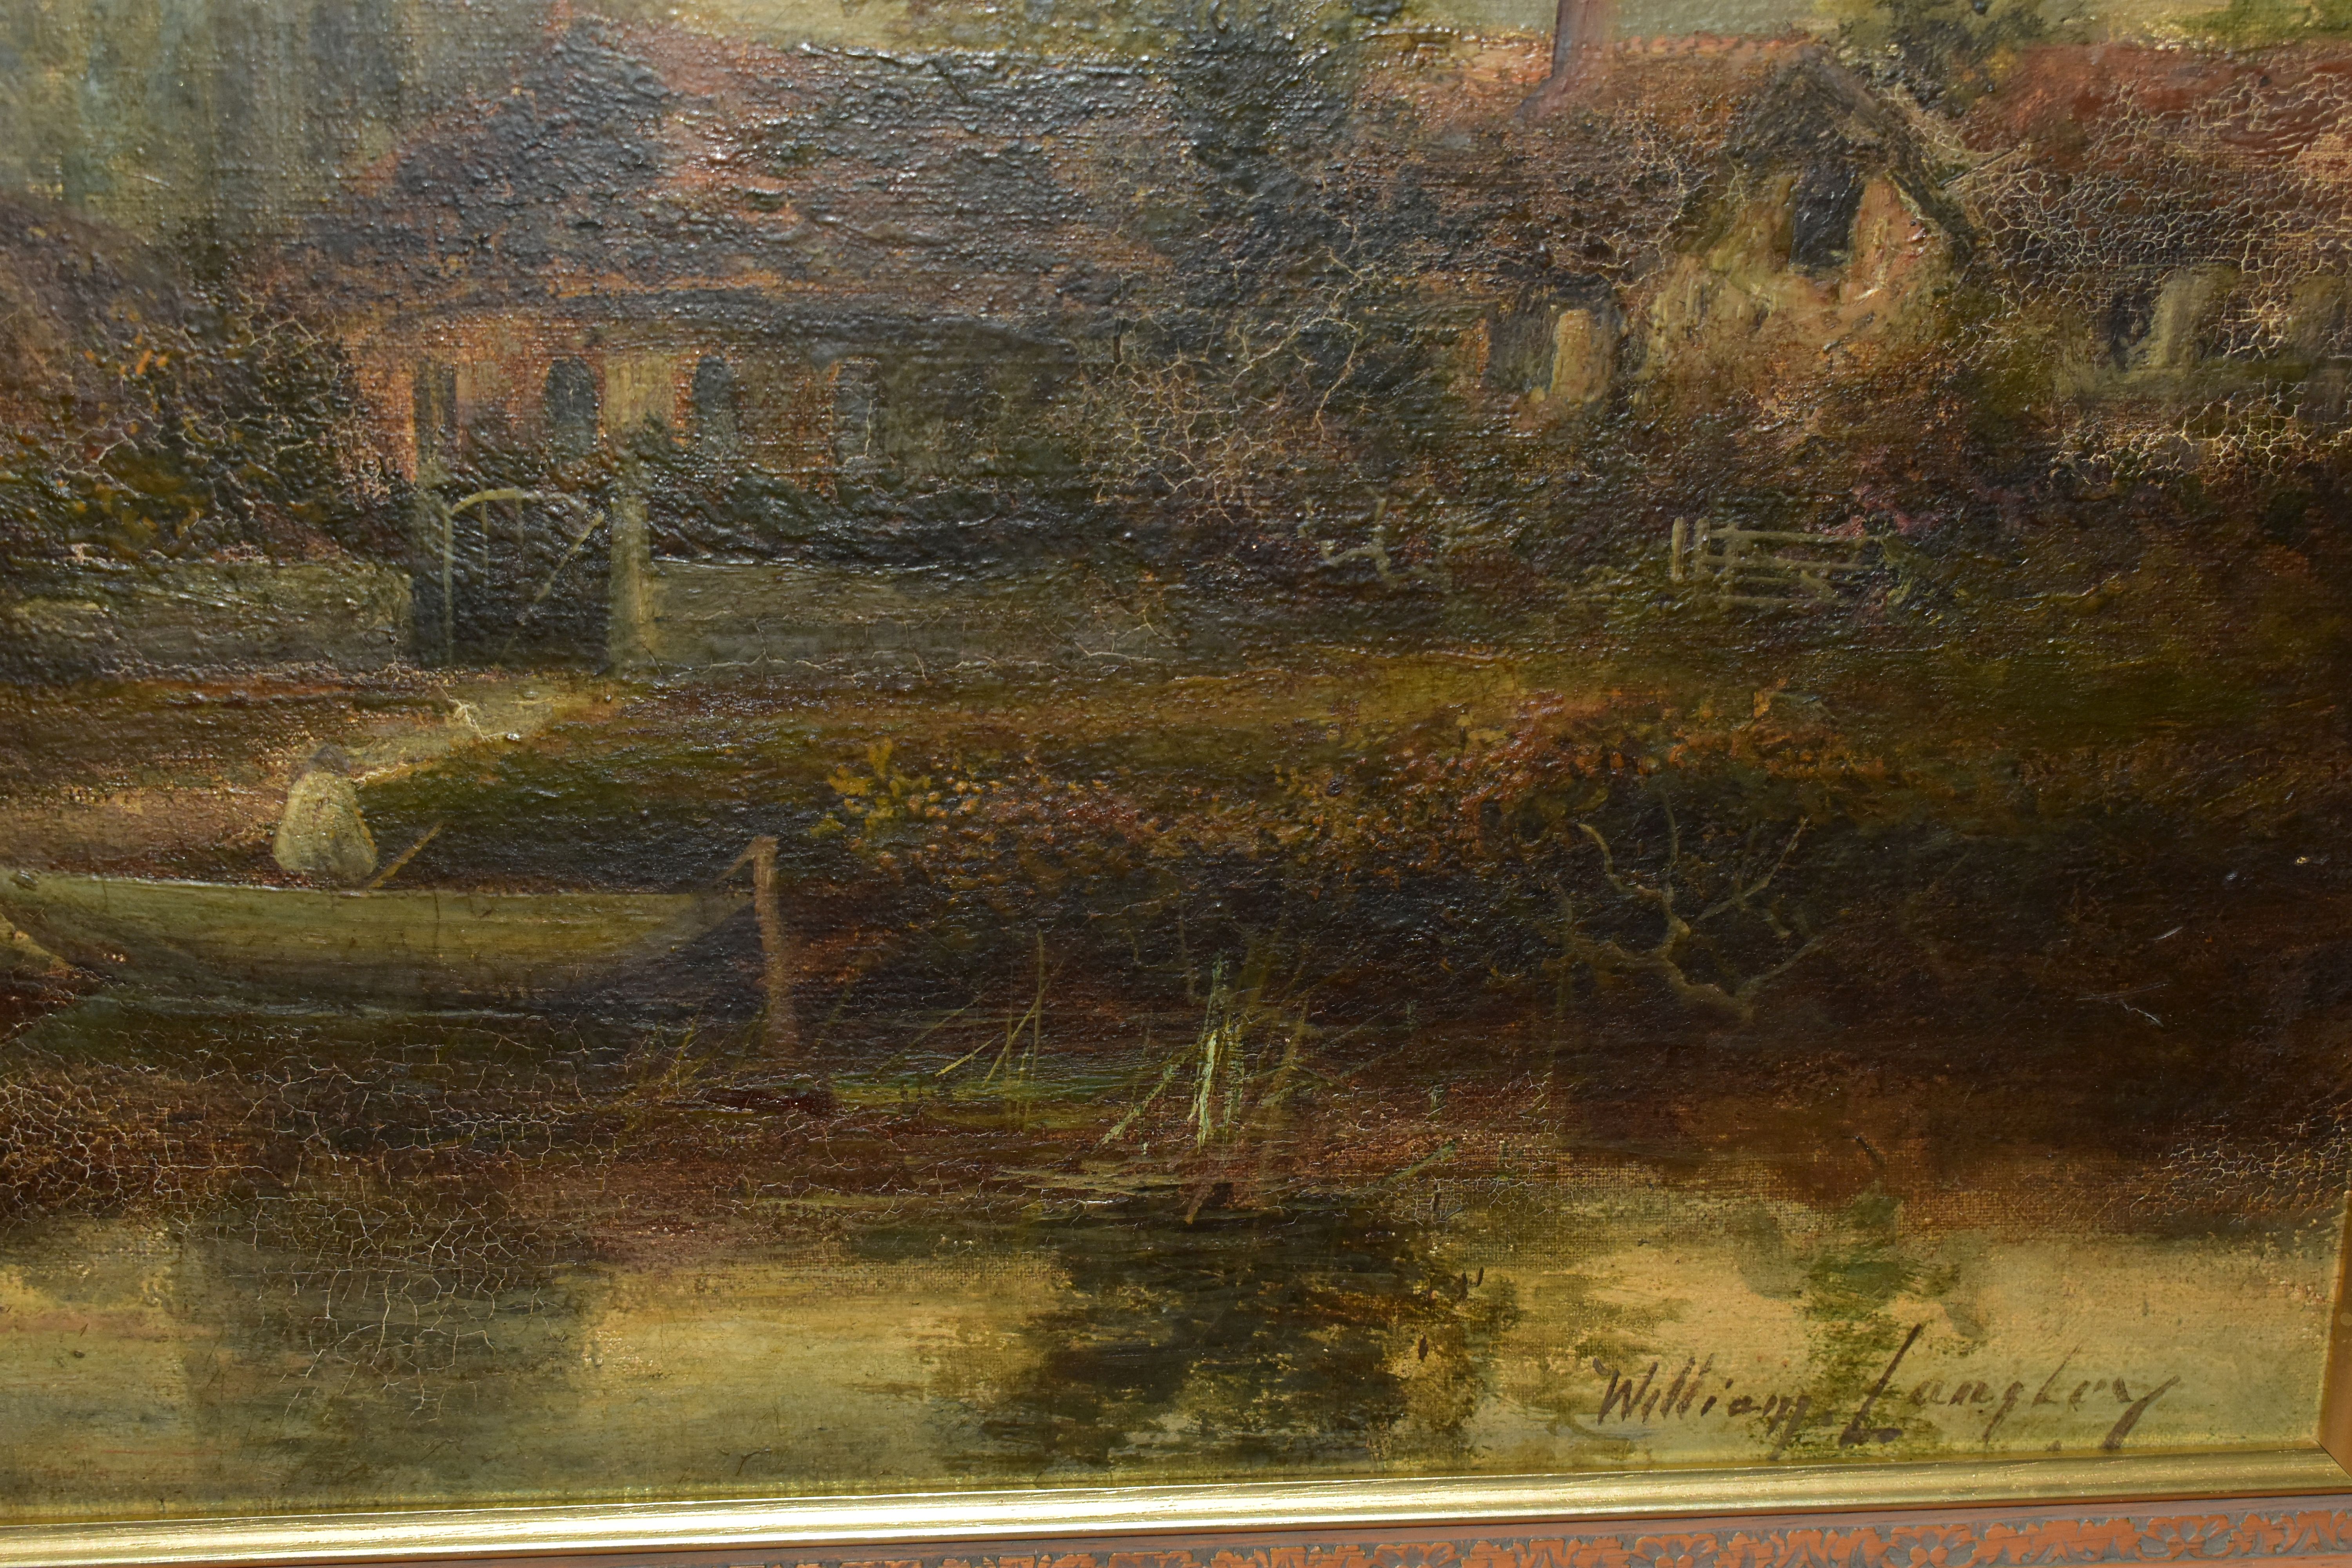 WILLIAM LANGLEY (LATE 19TH / EARLY 20TH CENTURY), A RIVER LANDSCAPE WITH CHURCH AND COTTAGES BEYOND, - Image 7 of 7